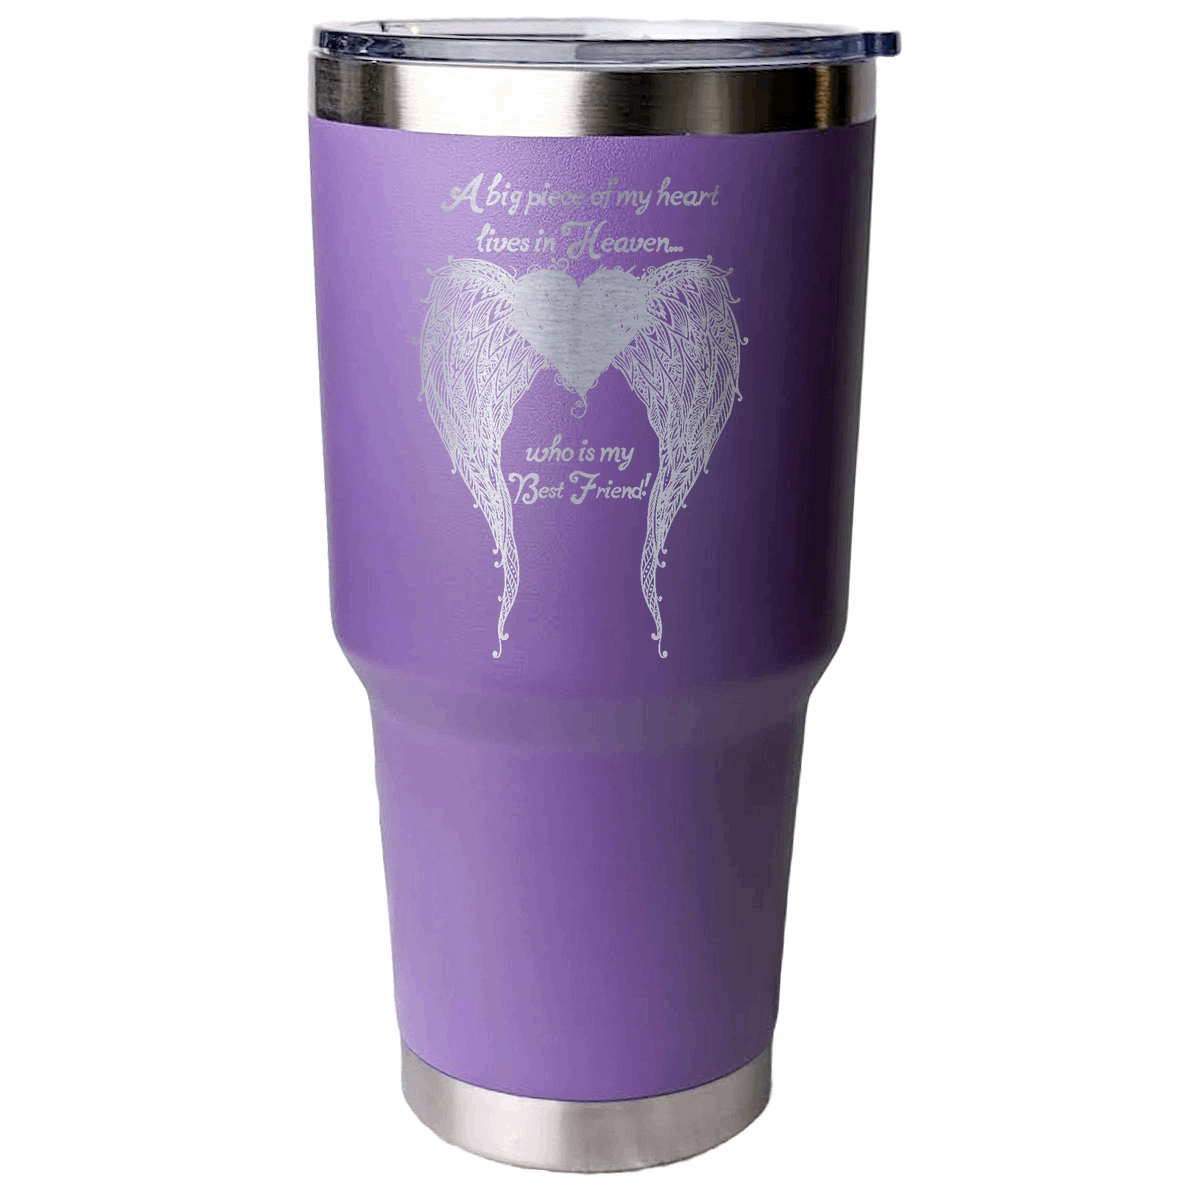 Best Friend  - A Big Piece of my Heart 30 Ounce Laser Etched Tumbler Purple